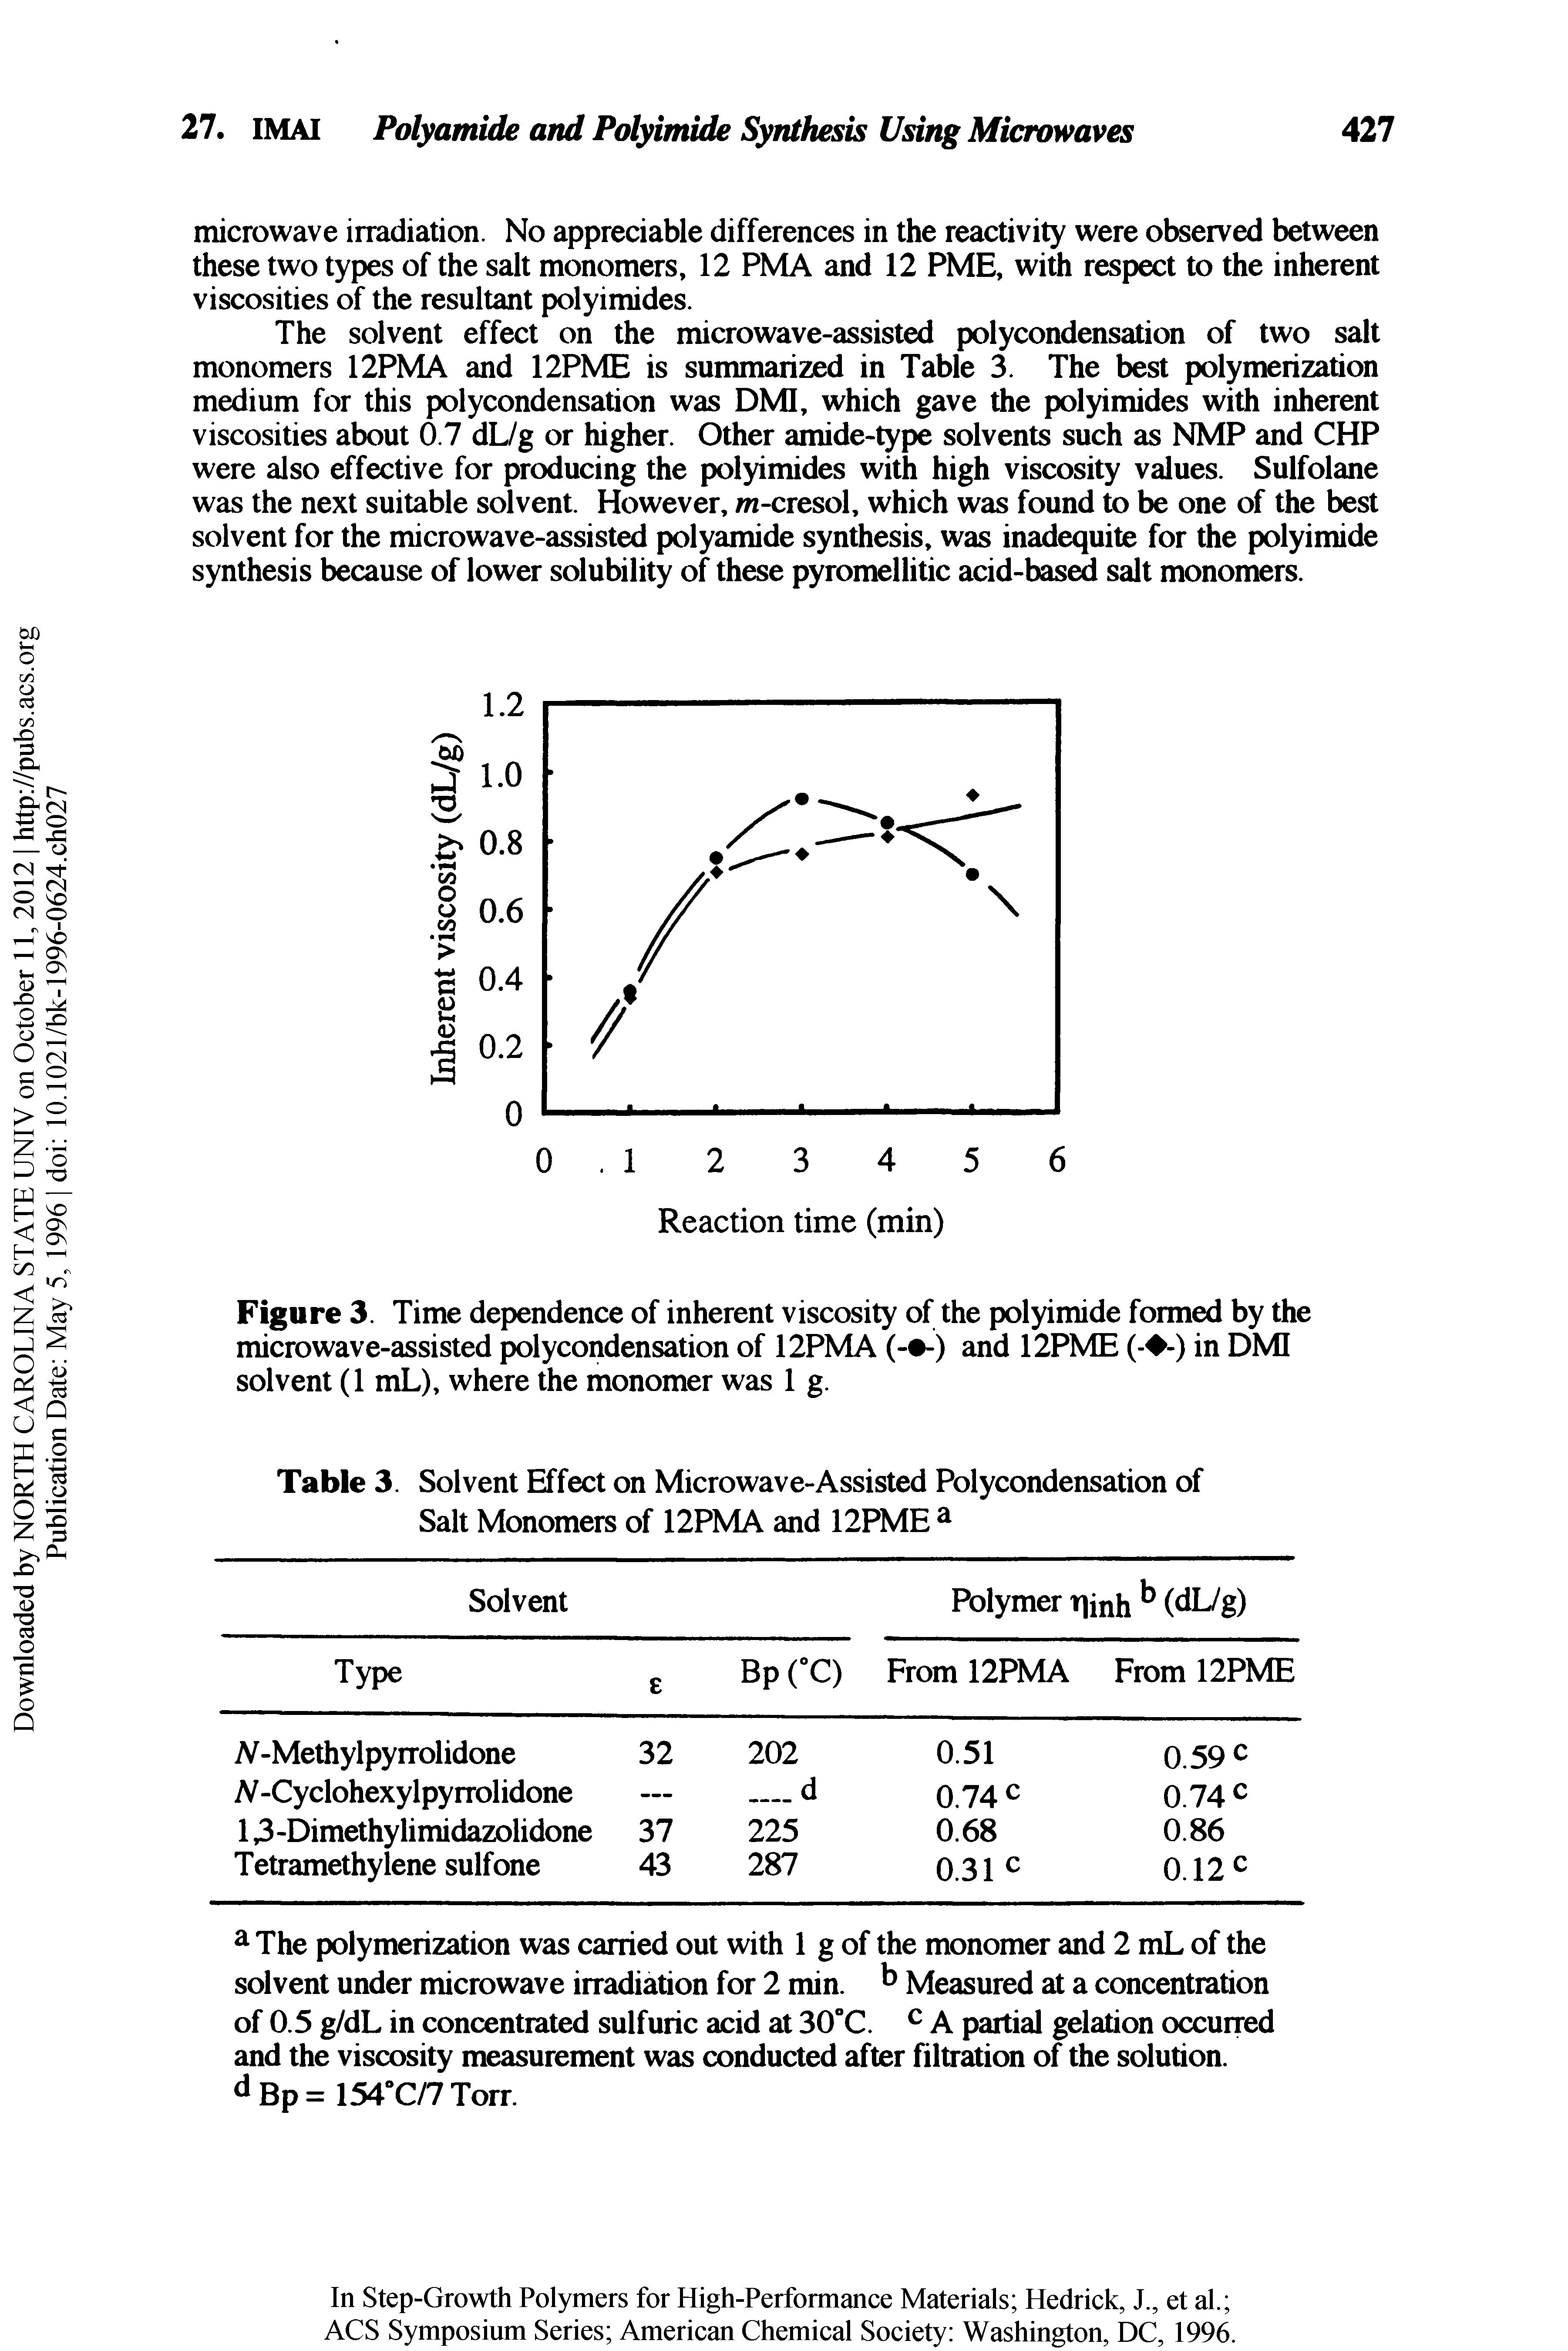 Figure 3. Time dependence of inherent viscosity of the polyimide formed by the microwave-assisted polycondensation of 12PMA (- -) and 12PME (- -) in DMI solvent (1 mL), where the monomer was 1 g.